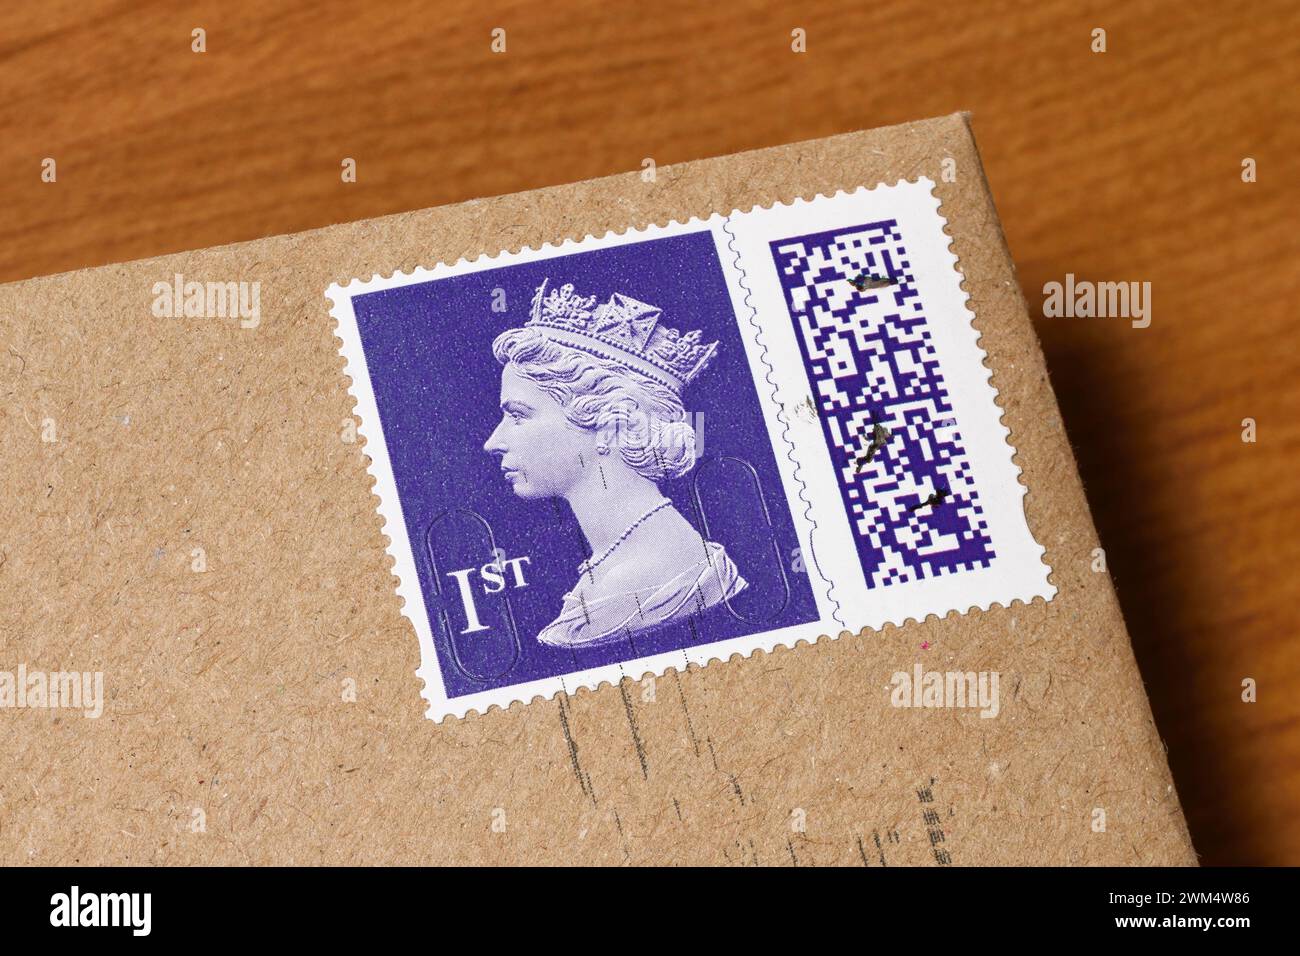 A Royal Mail Barcoded First Class stamp on a brown envelope Stock Photo